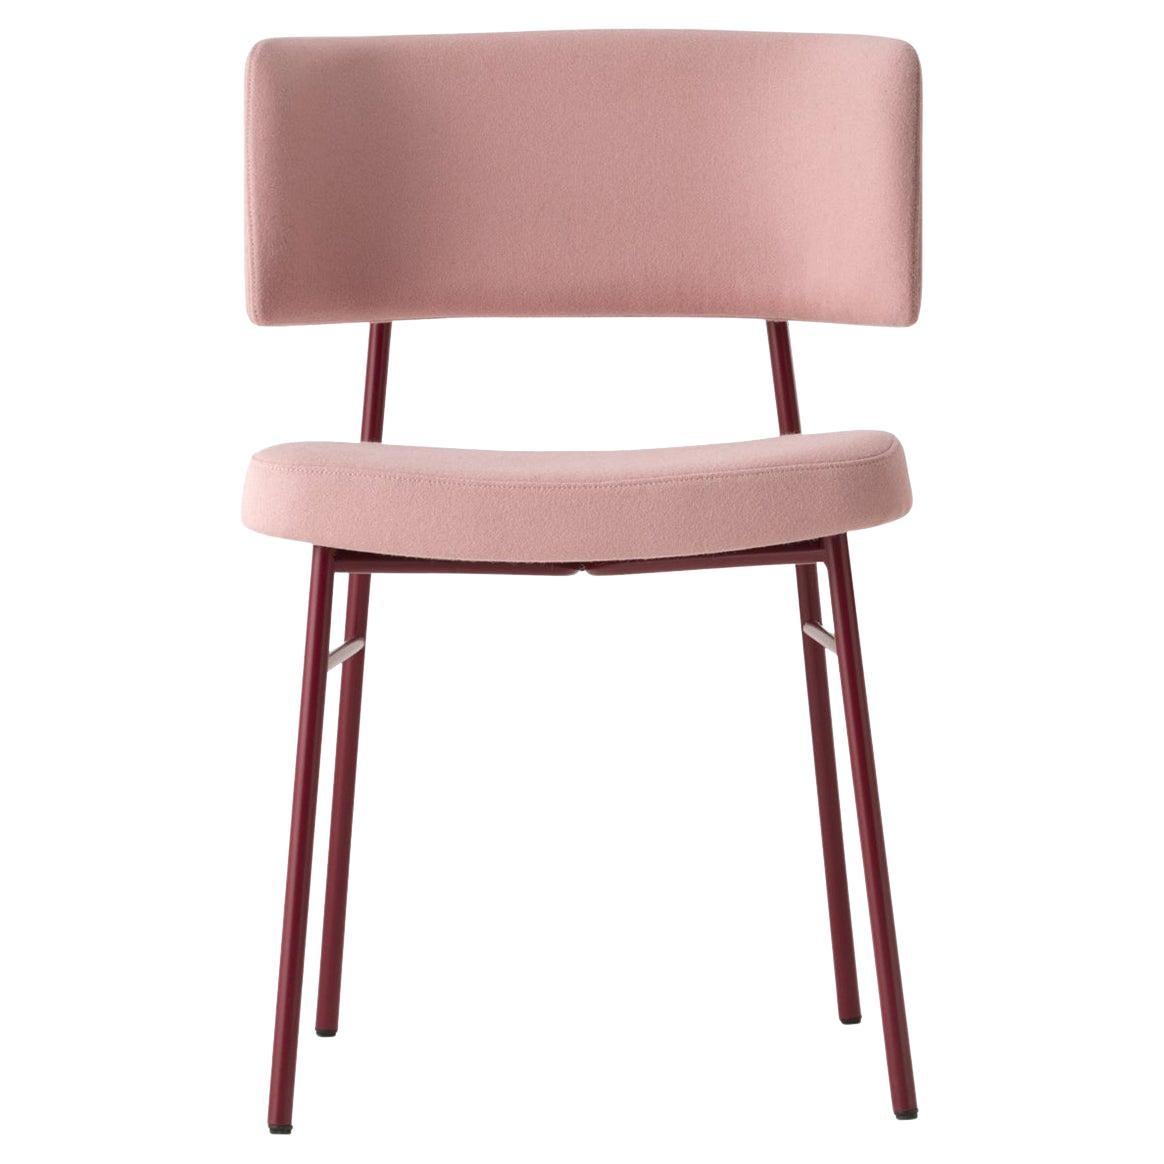 Comfort, an ergonomic shape and a hardy structure are the characteristics of the Marlen design, the new Trabà chair designed by EP Studio.
Hints of a 1950s vibe can be glimpsed in the curvature of the backrest, generously padded, like the seat, and